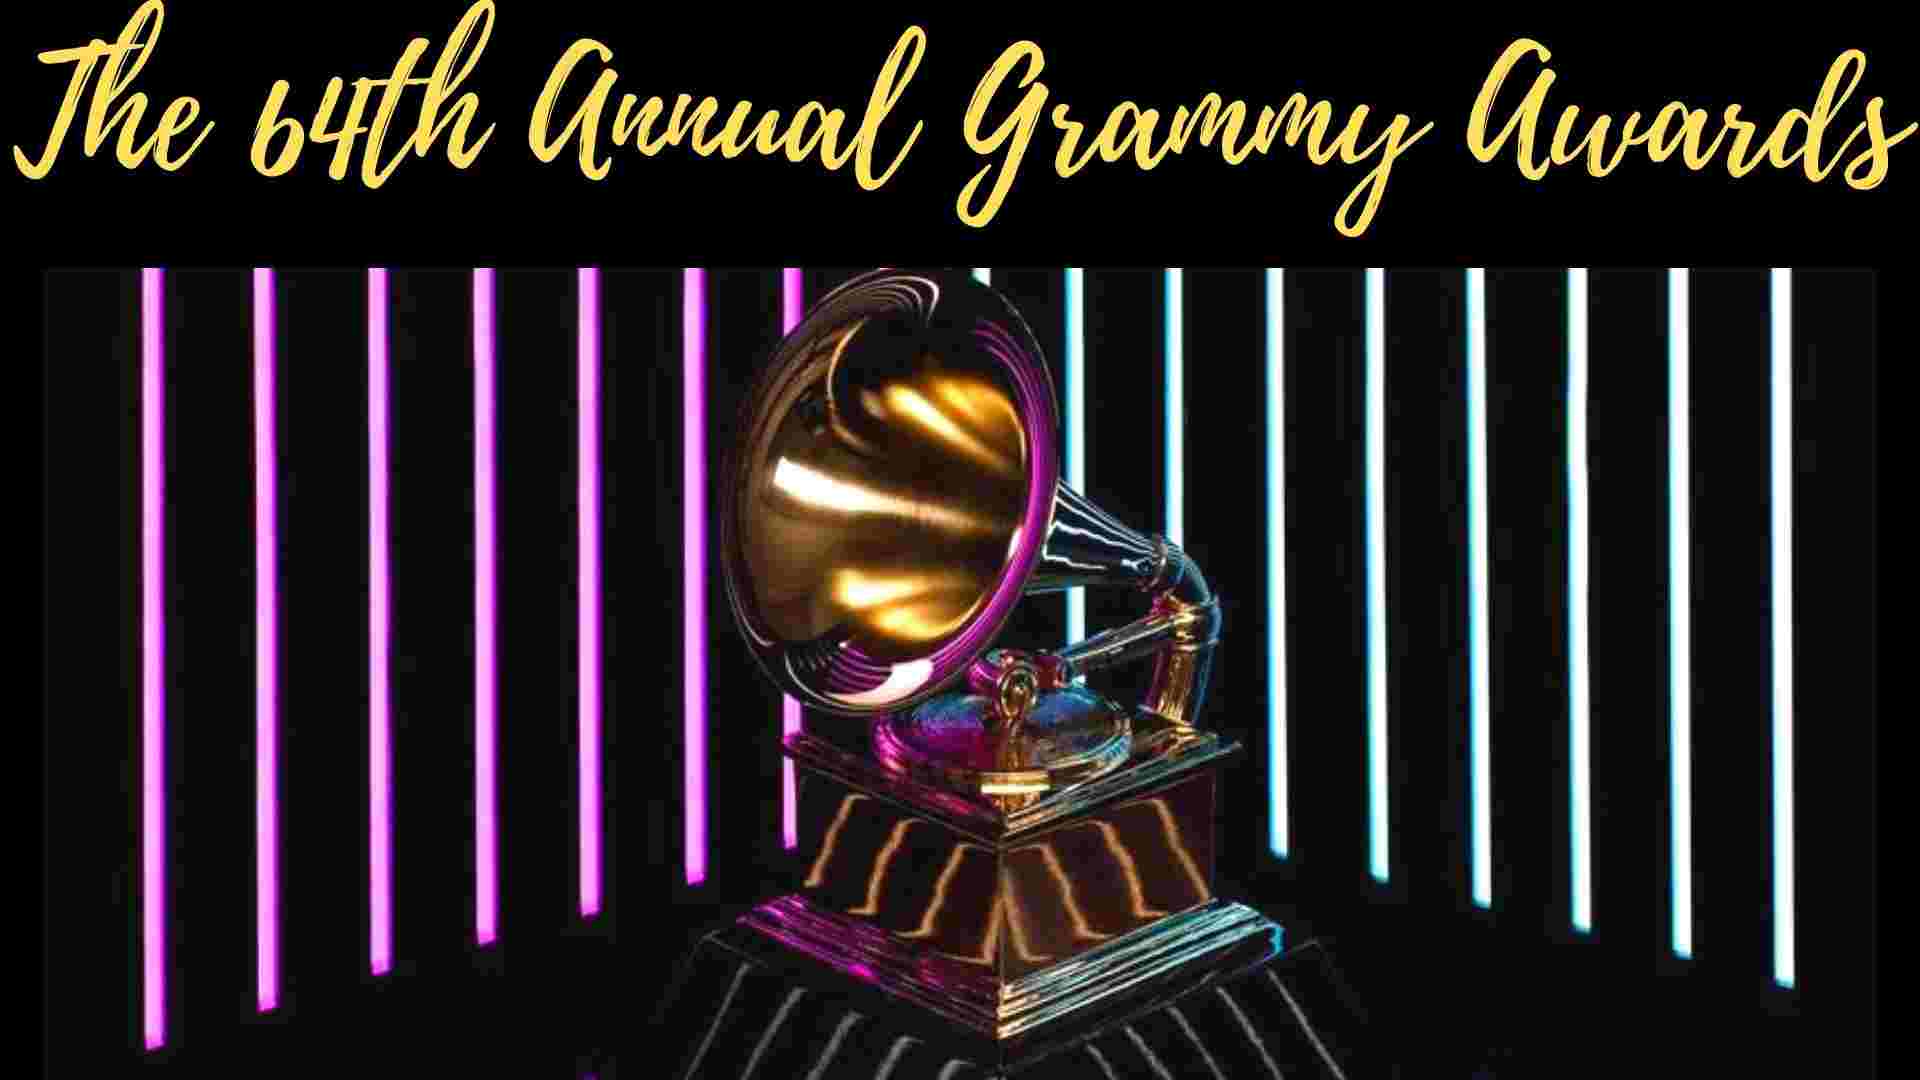 64th Annual Grammy Awards Parents guide and Age Rating | 2022